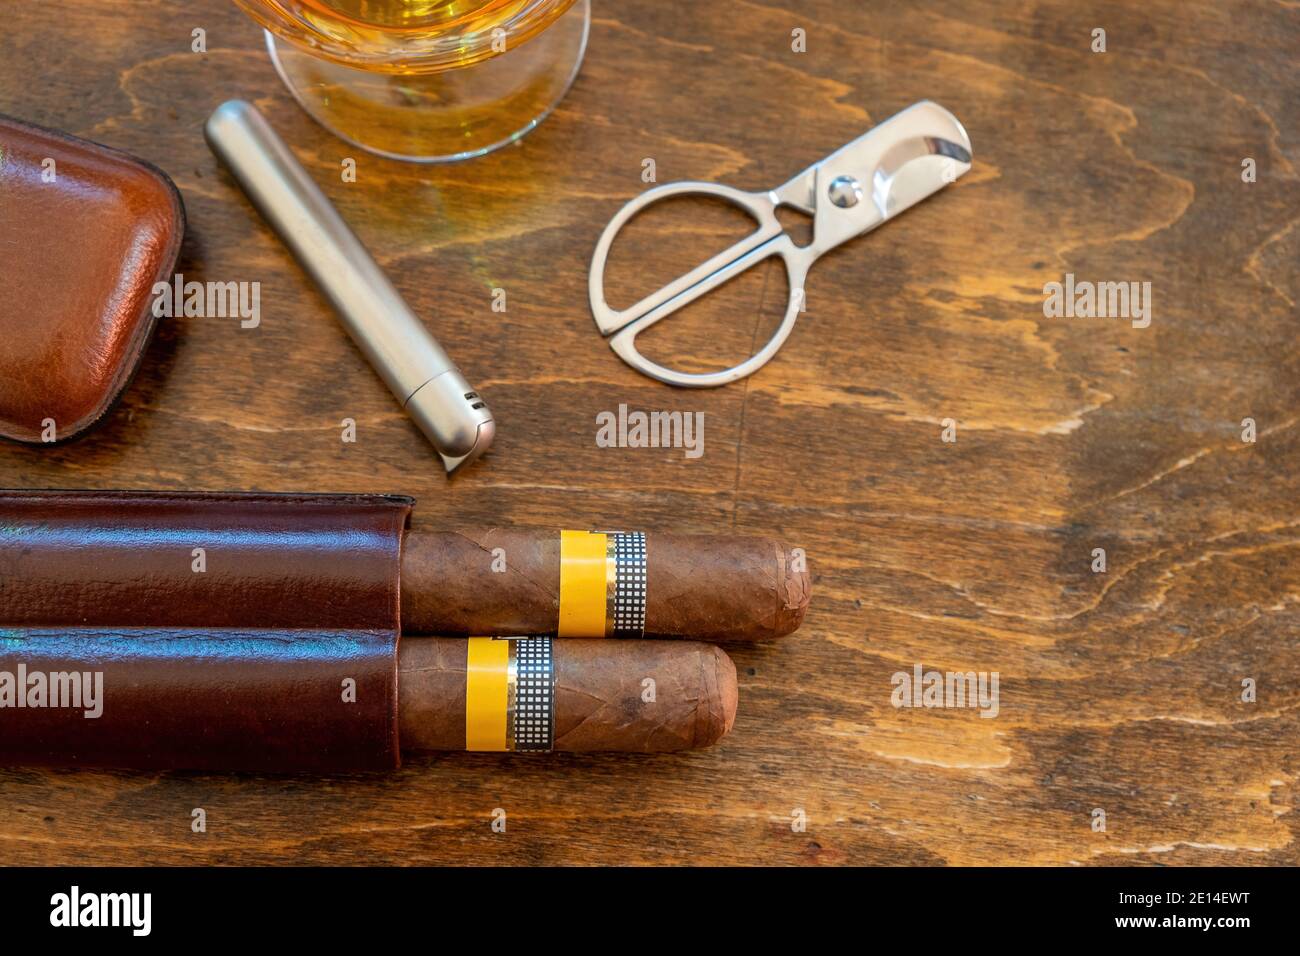 Tobacco and alcohol. Cigar and brandy on a wooden table, top view. Cuban quality brand cigars and rum, smoking and drinking luxury lifestyle Stock Photo